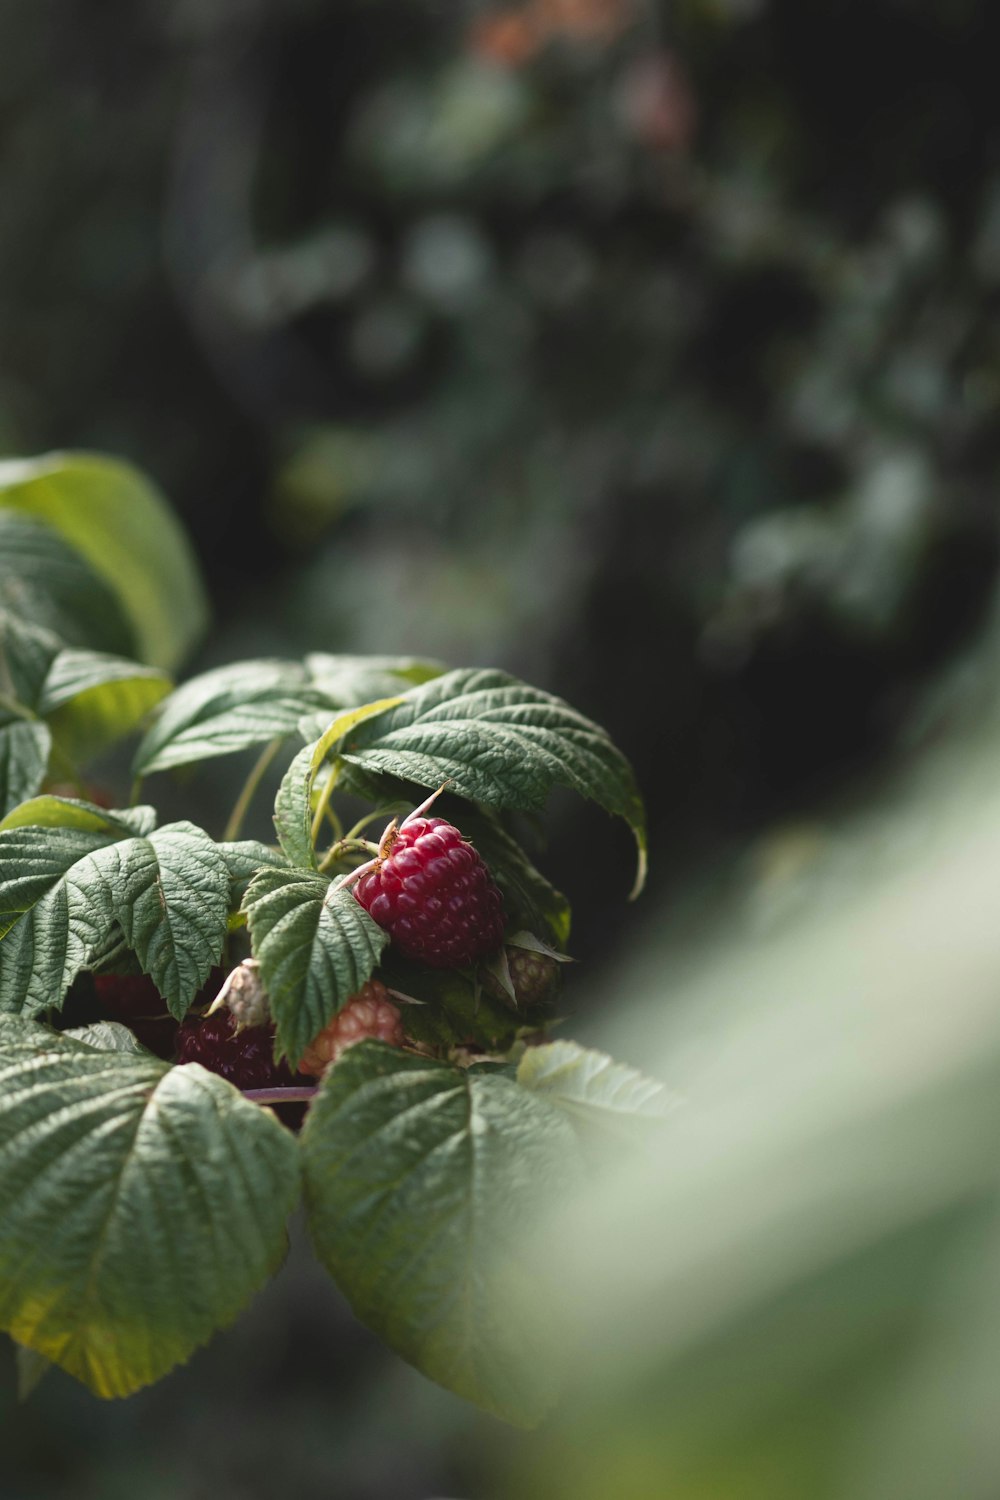 a raspberry plant with green leaves and red berries